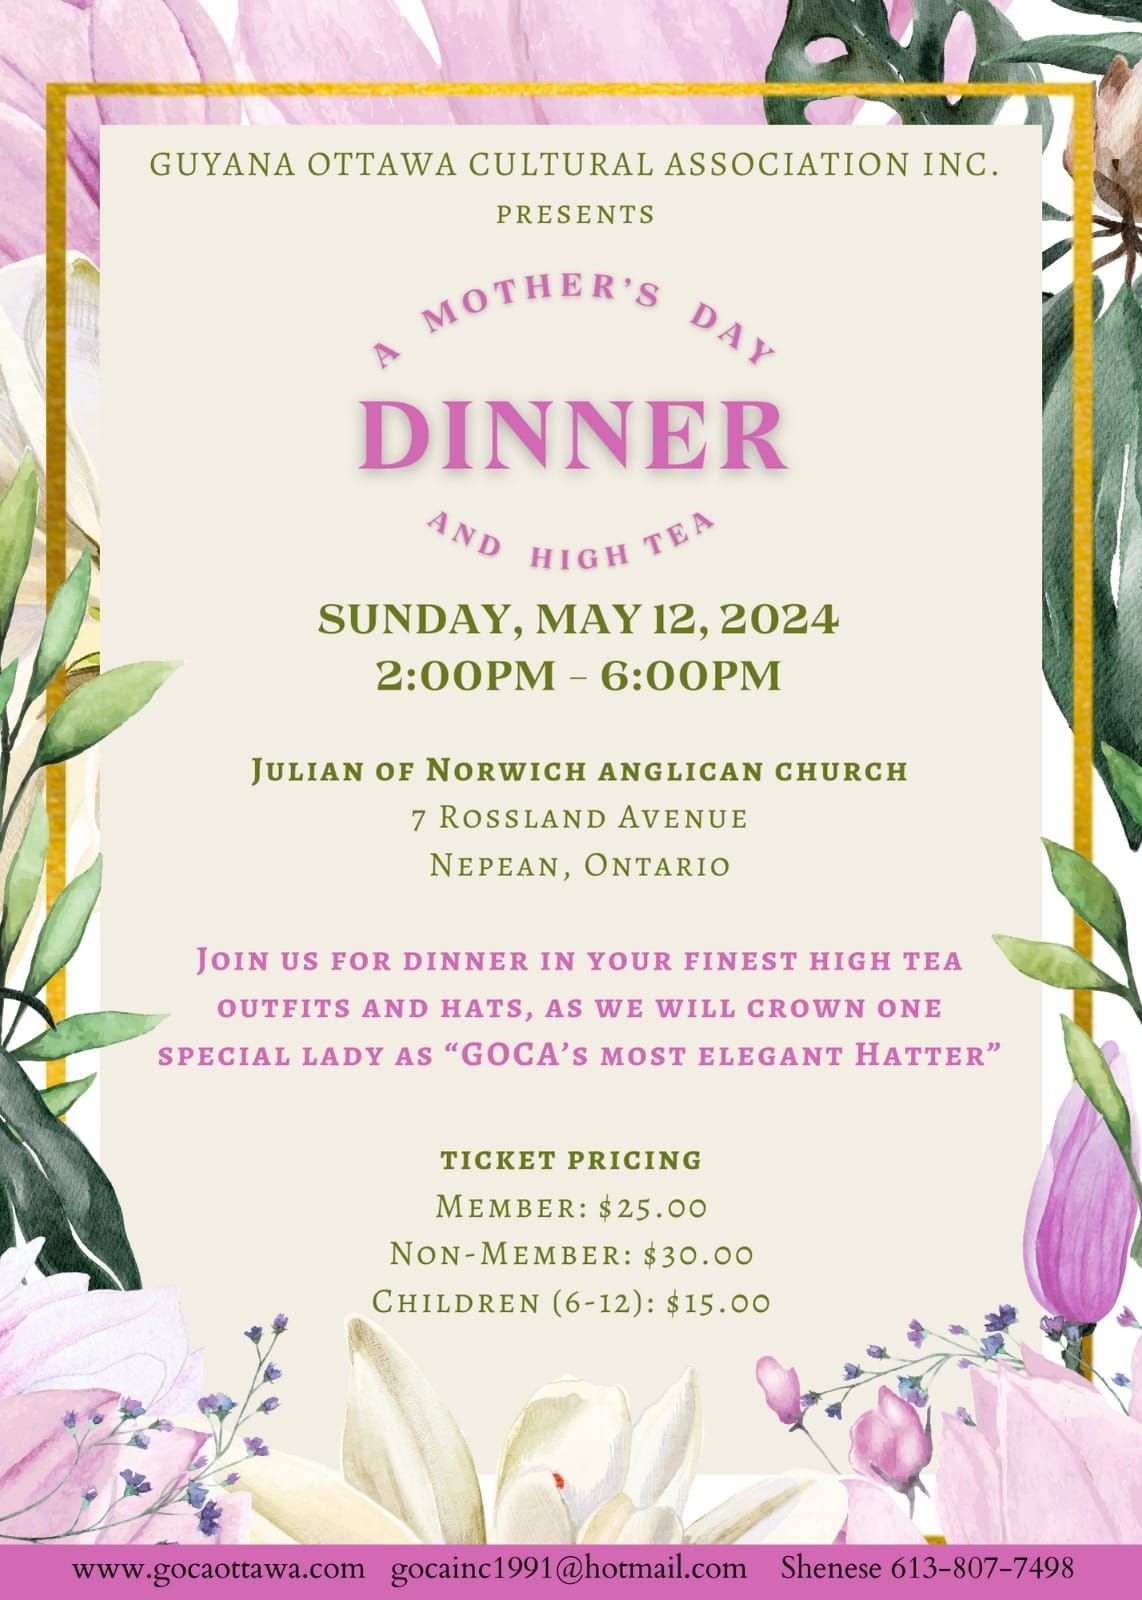 GOCA presents A Mother's Day Dinner and High Tea